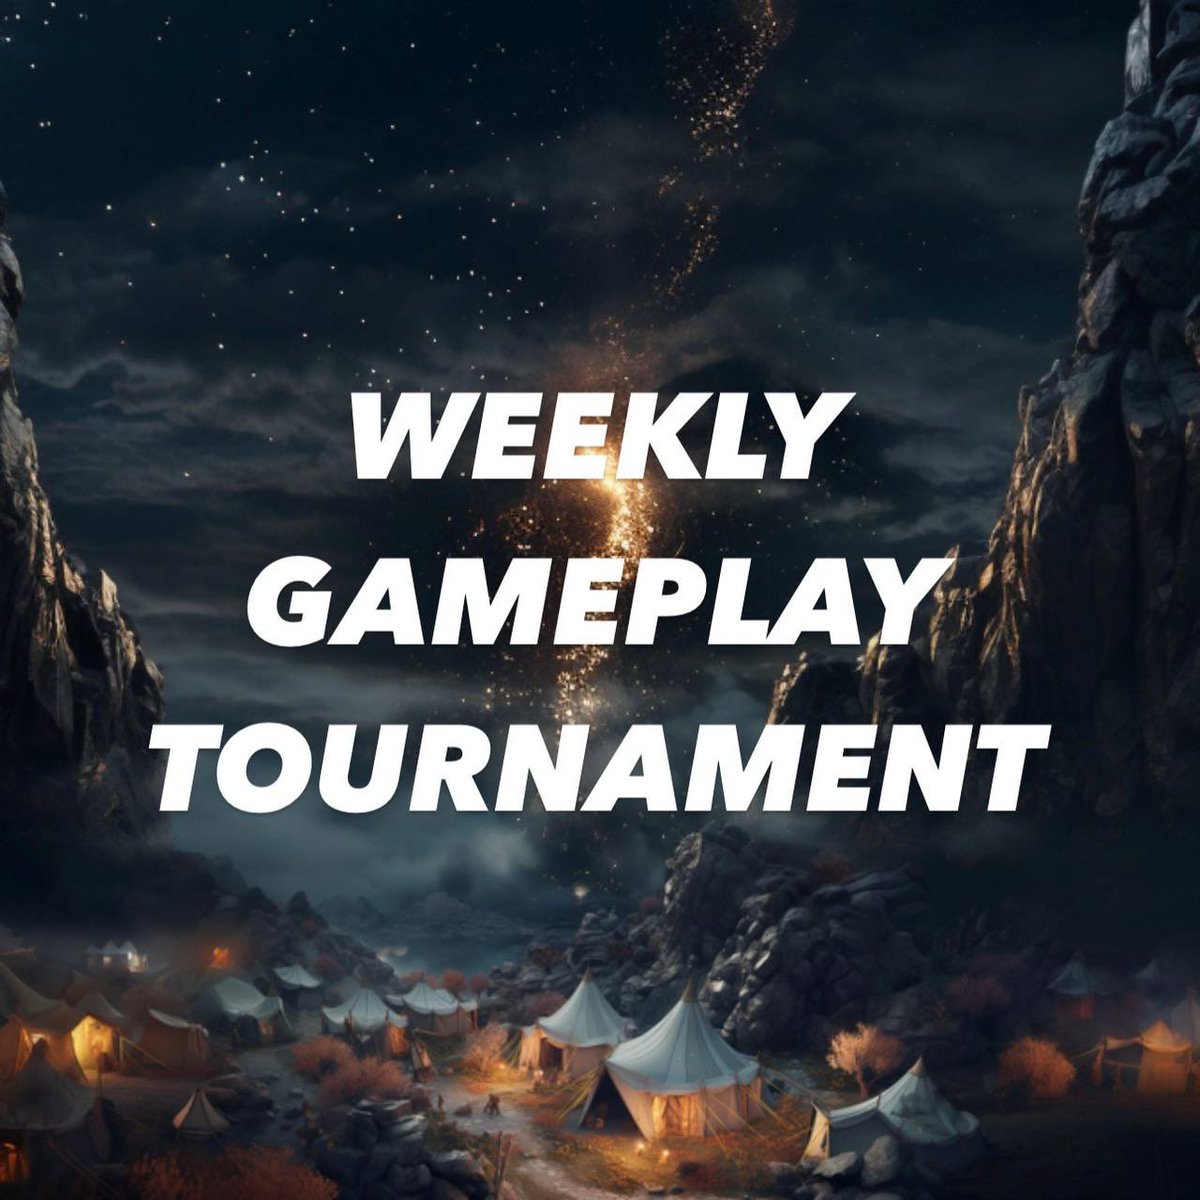 In the Gameplay Competition first place takes Mansory and receives $TIN500

Second place and 300 tokens goes to Kate

Third place and 200 tokens goes to yoshilol 

We'll use their epic combos in our videos this week. The competition continues and next Sunday we will give away